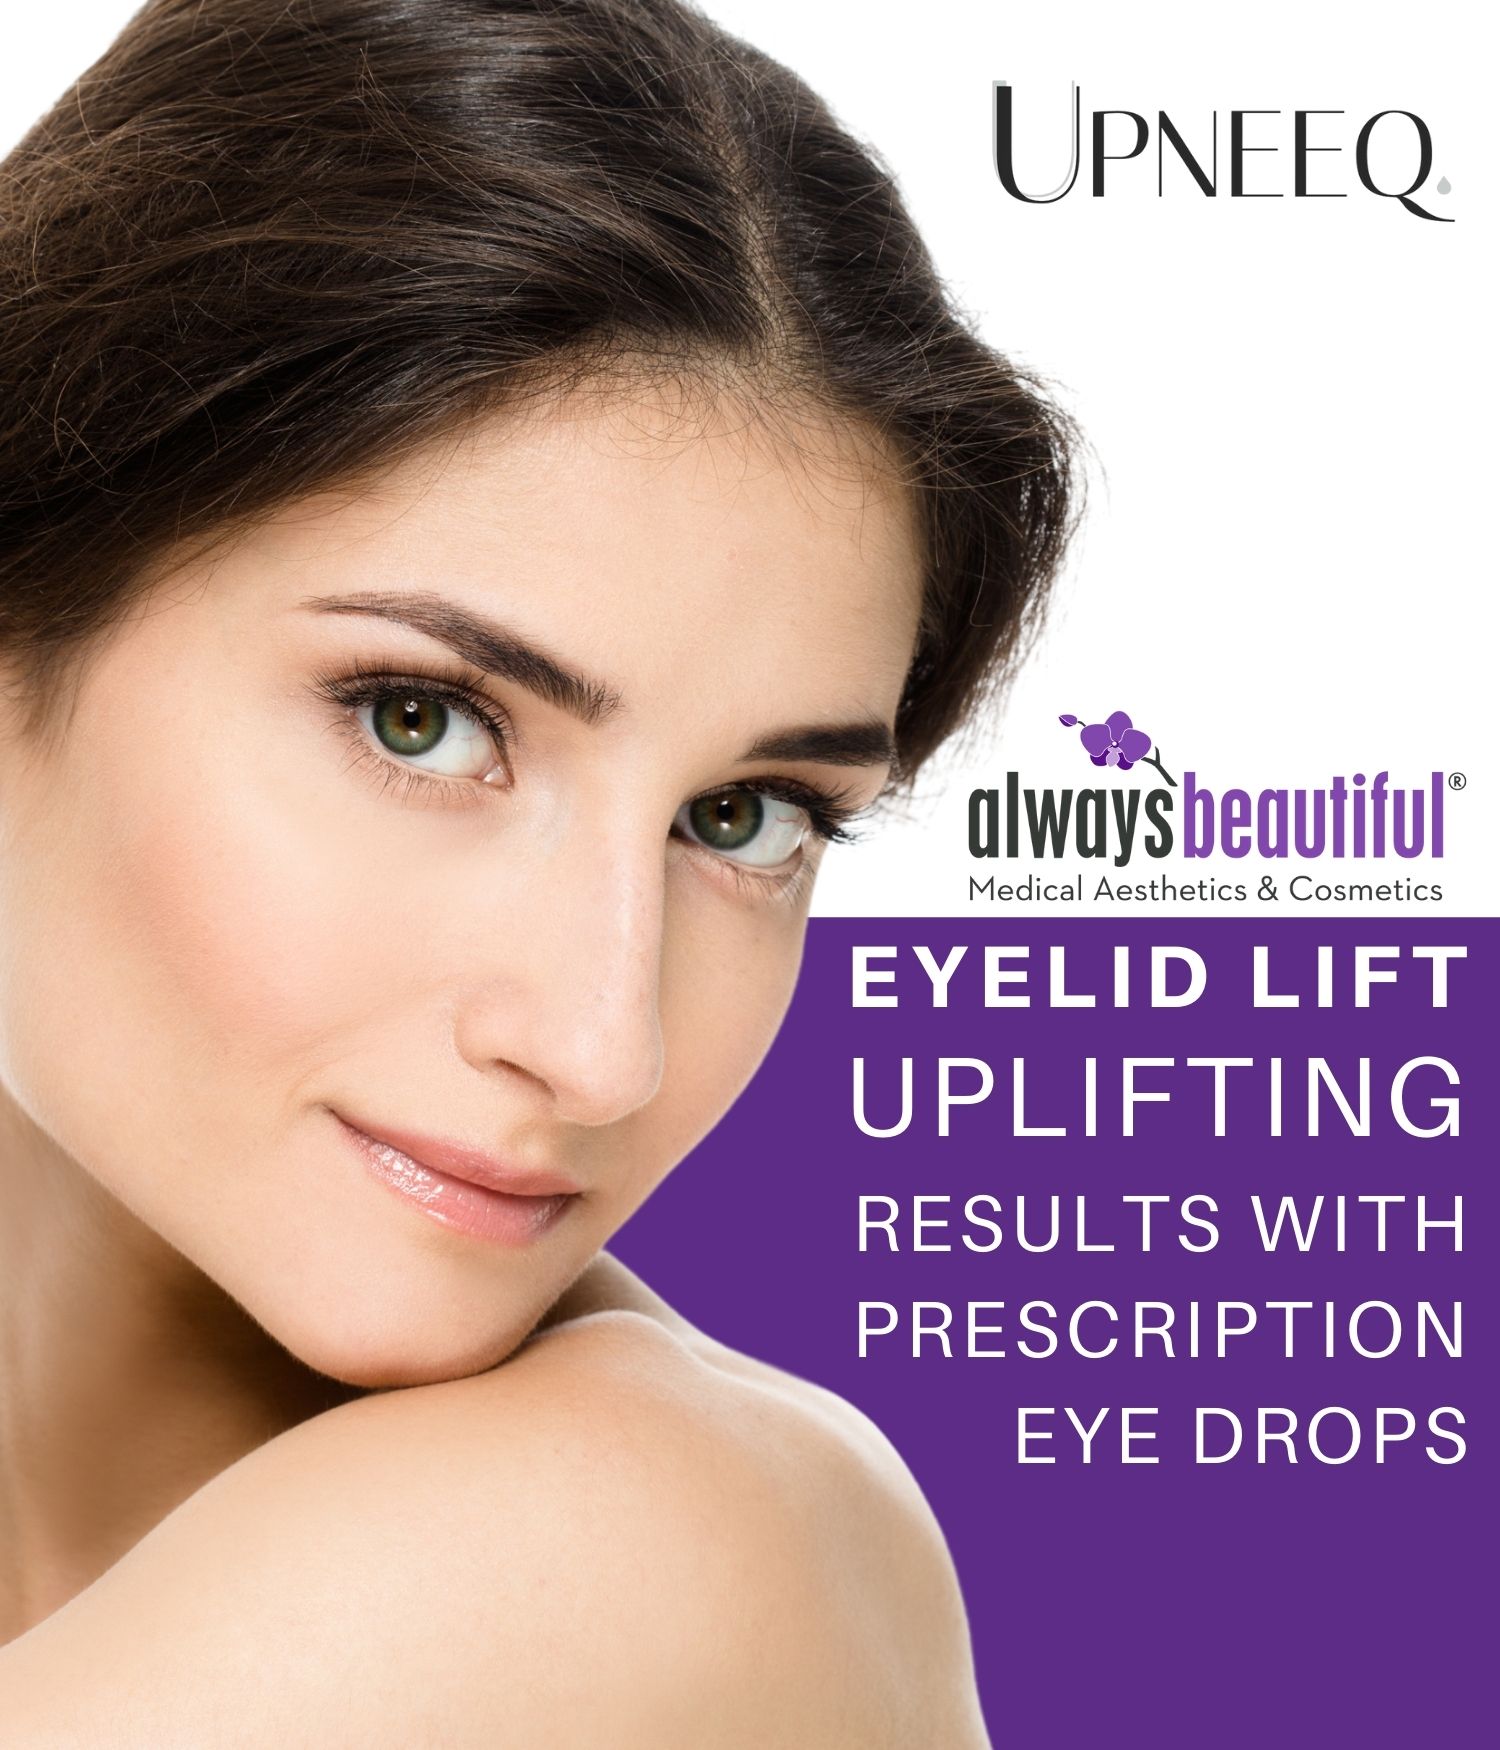 woman with bright eyes after UPNEEQ treatment